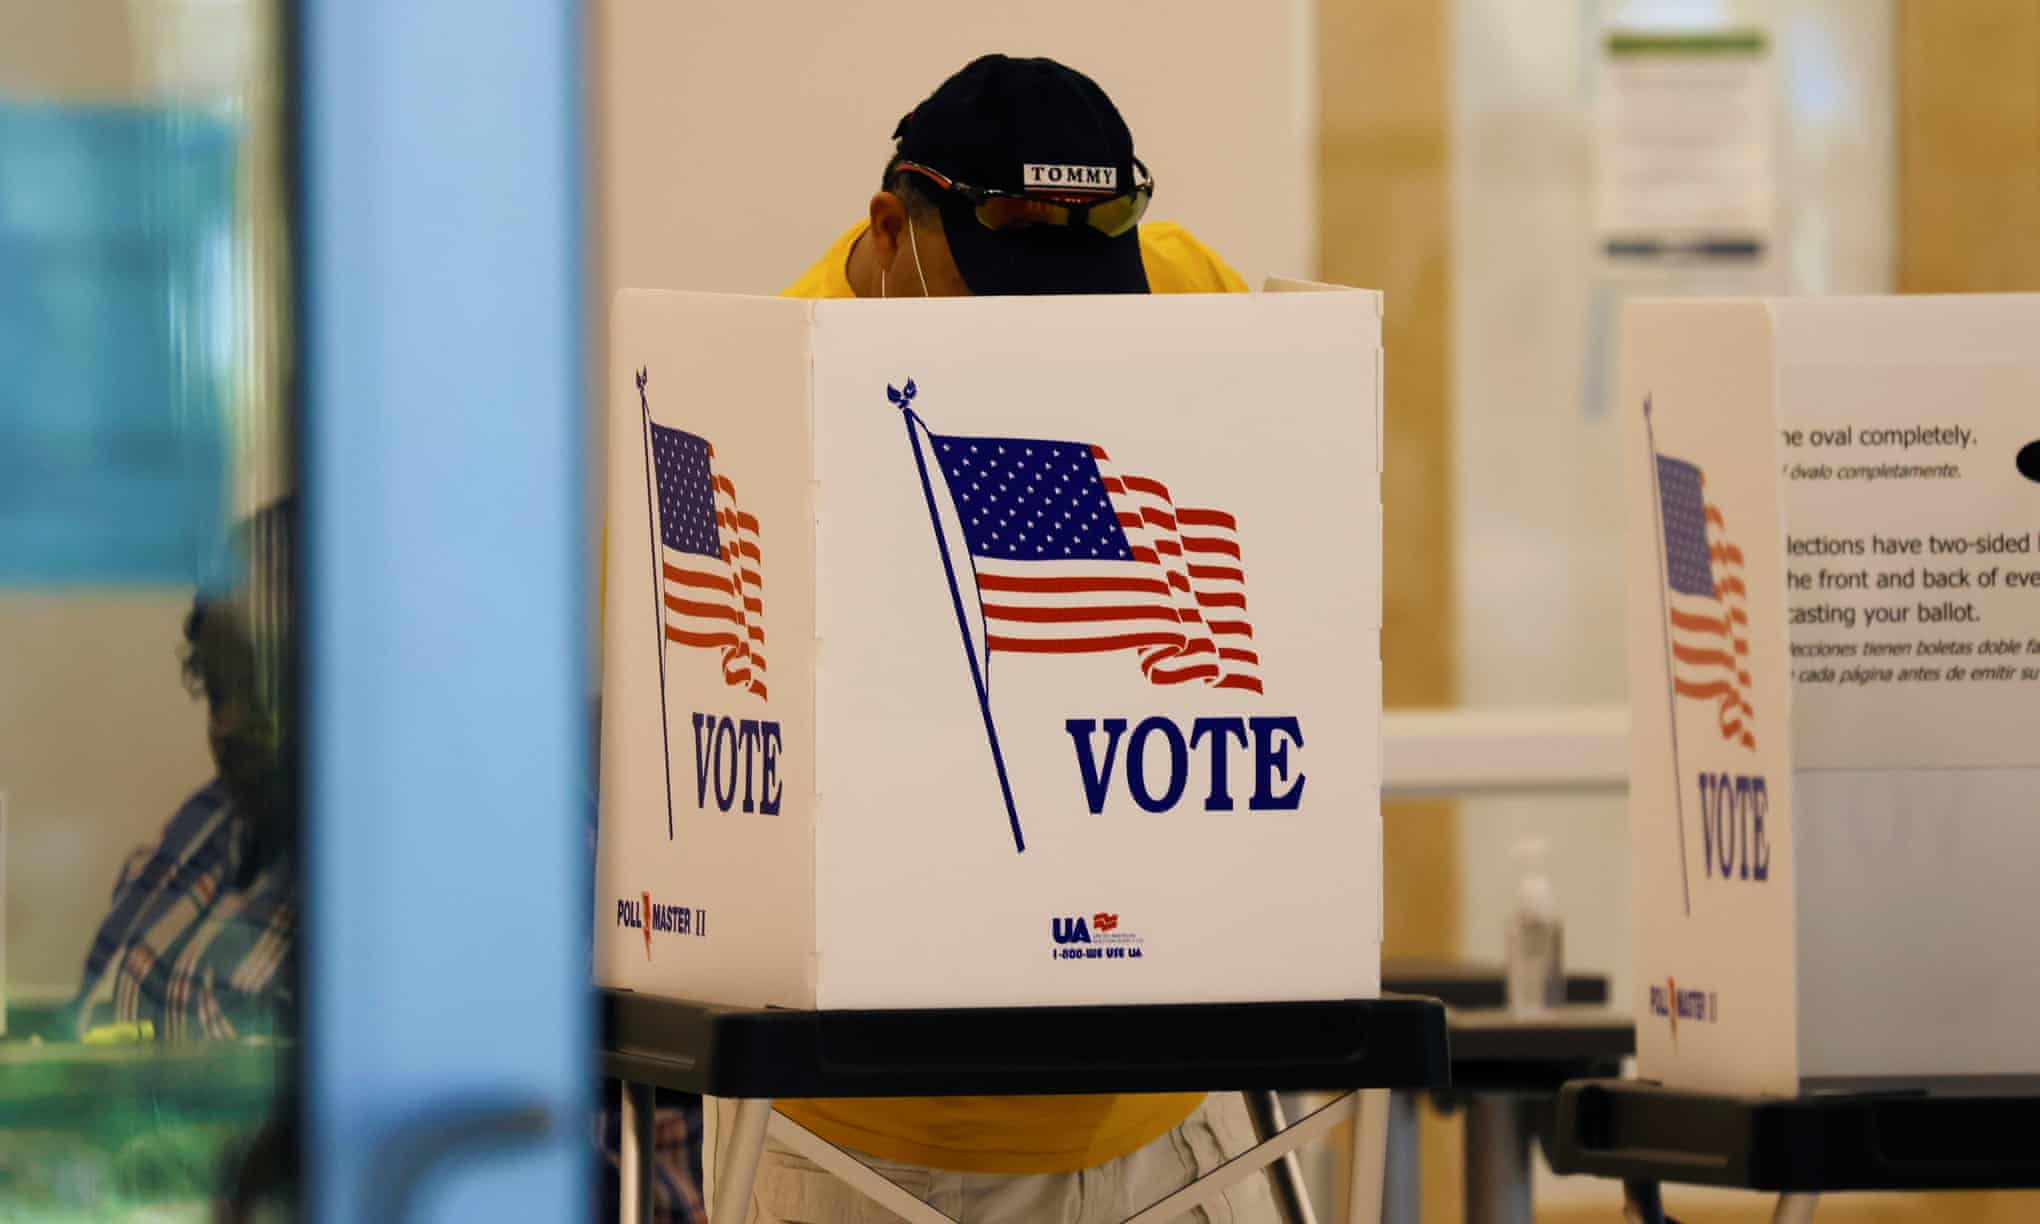 Floridians charged over voting believed they were eligible, documents show (theguardian.com)